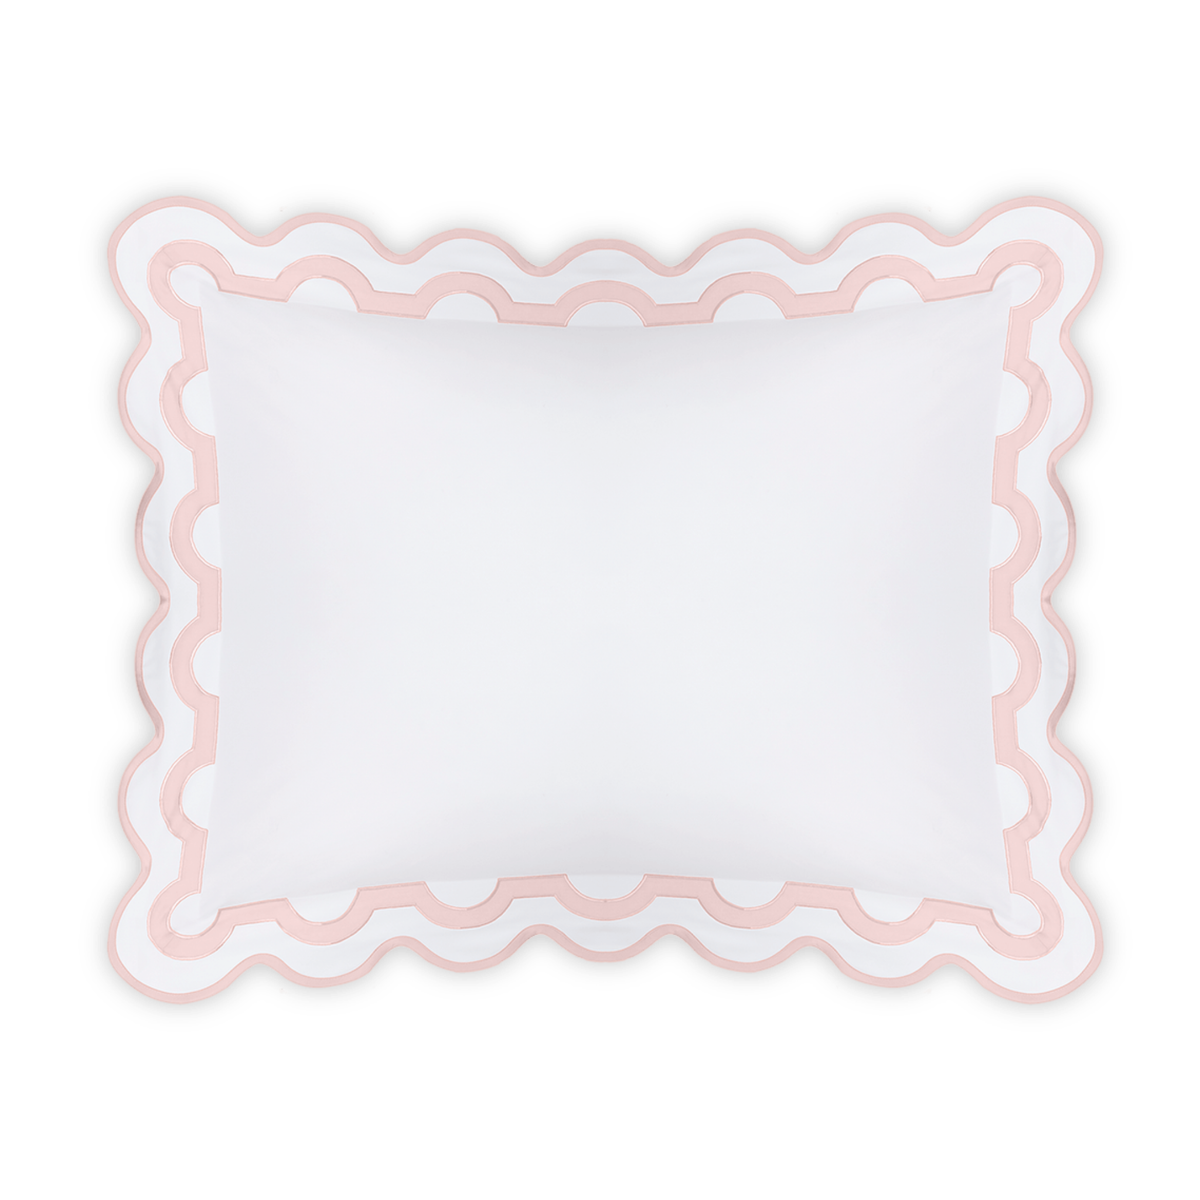 Standard Sham of Matouk Mirasol Collection in Pink Color